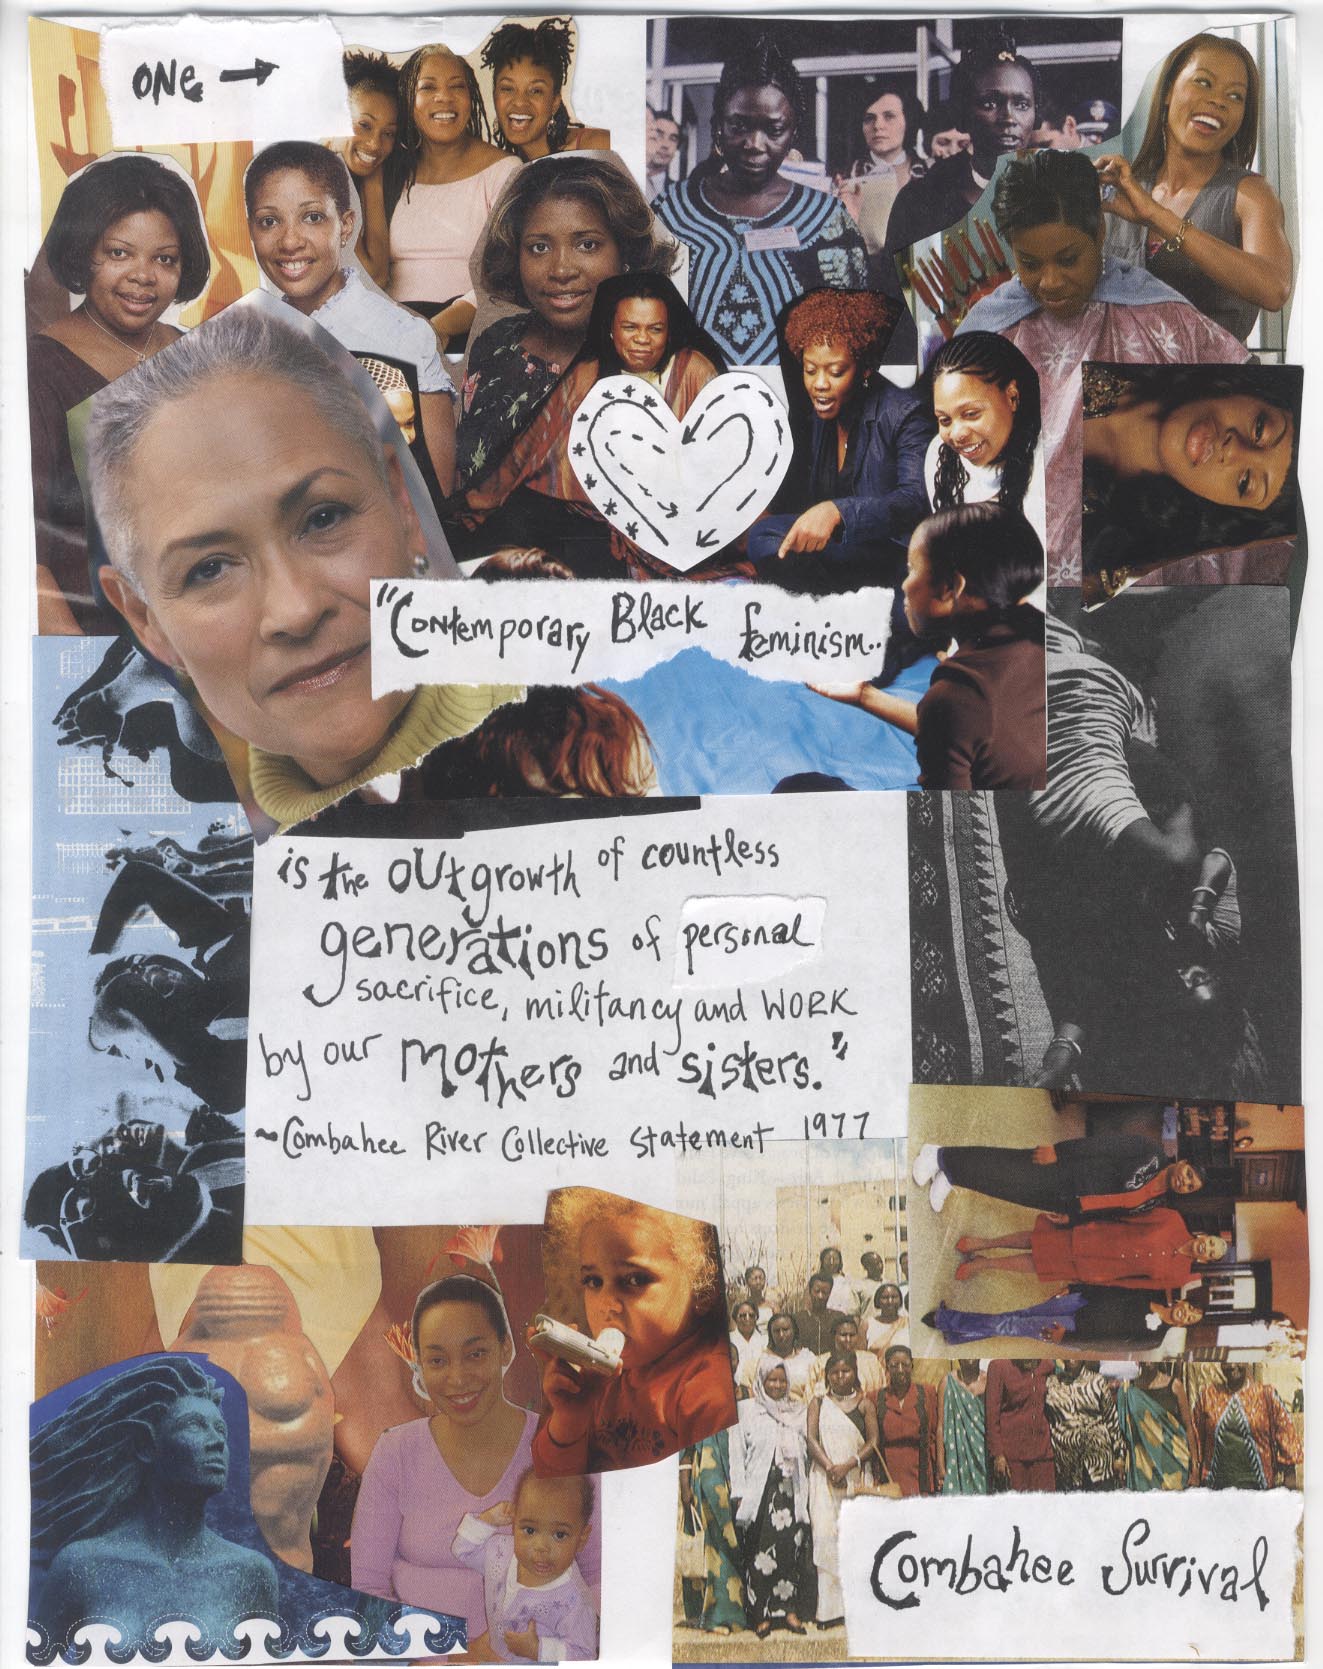 Combahee River Collective